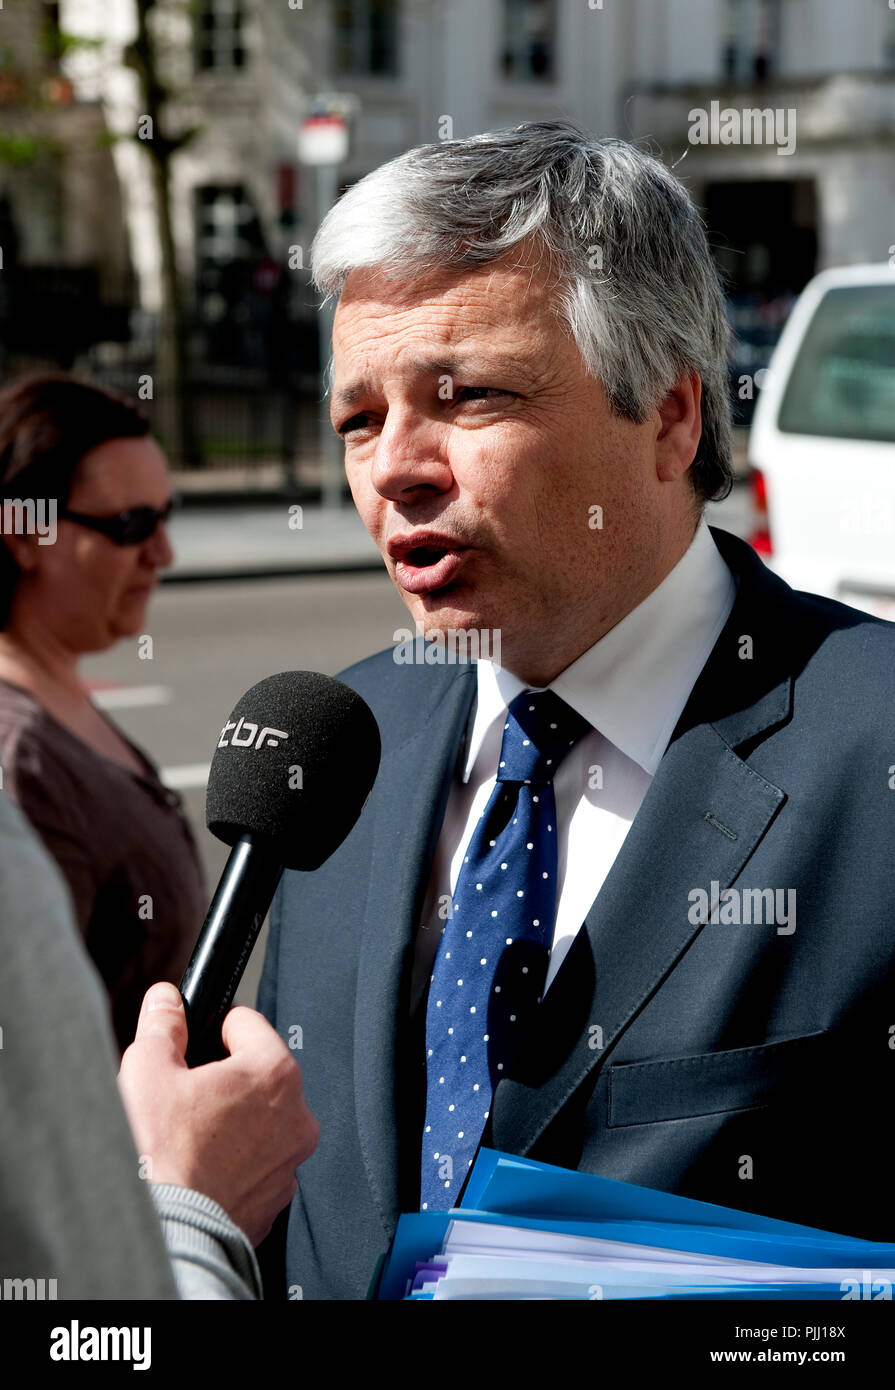 Outgoing Ministre of Finances Didier Reynders pictured as he arrives in the Wetstraat 16 before the Chamber plenary session in the Belgium parliament  Stock Photo